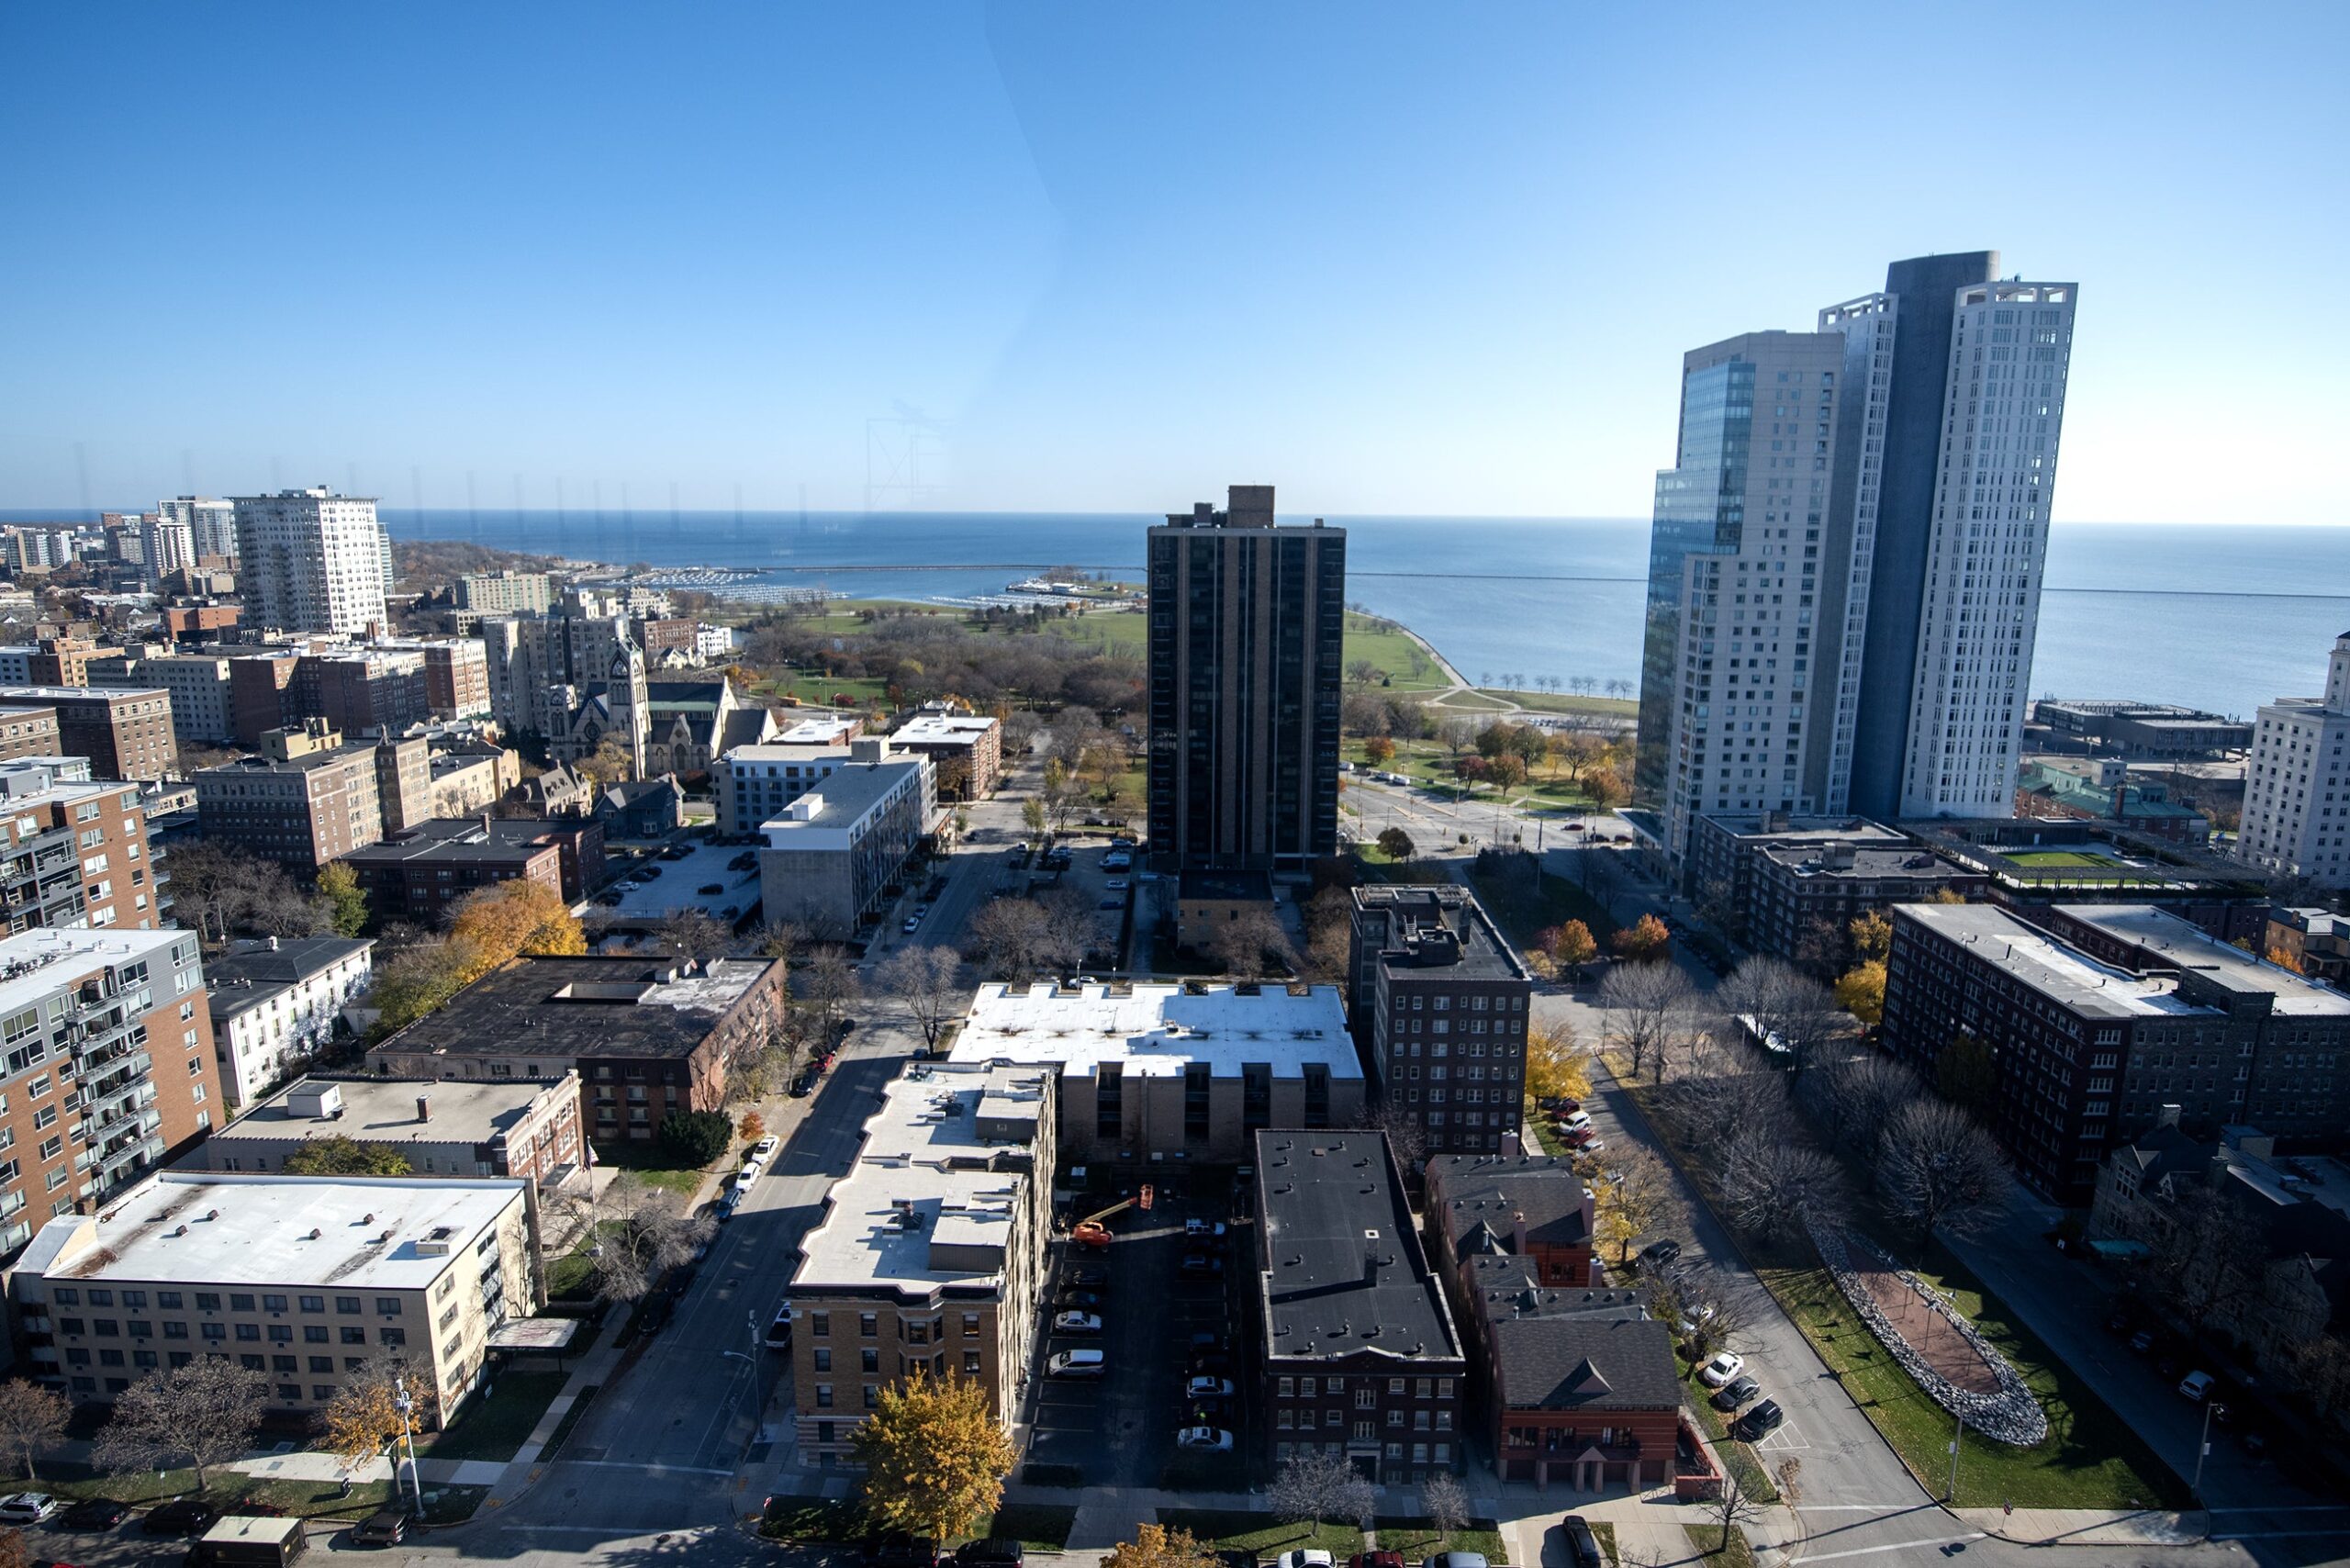 Buildings in Milwaukee are seen from above on a sunny day.